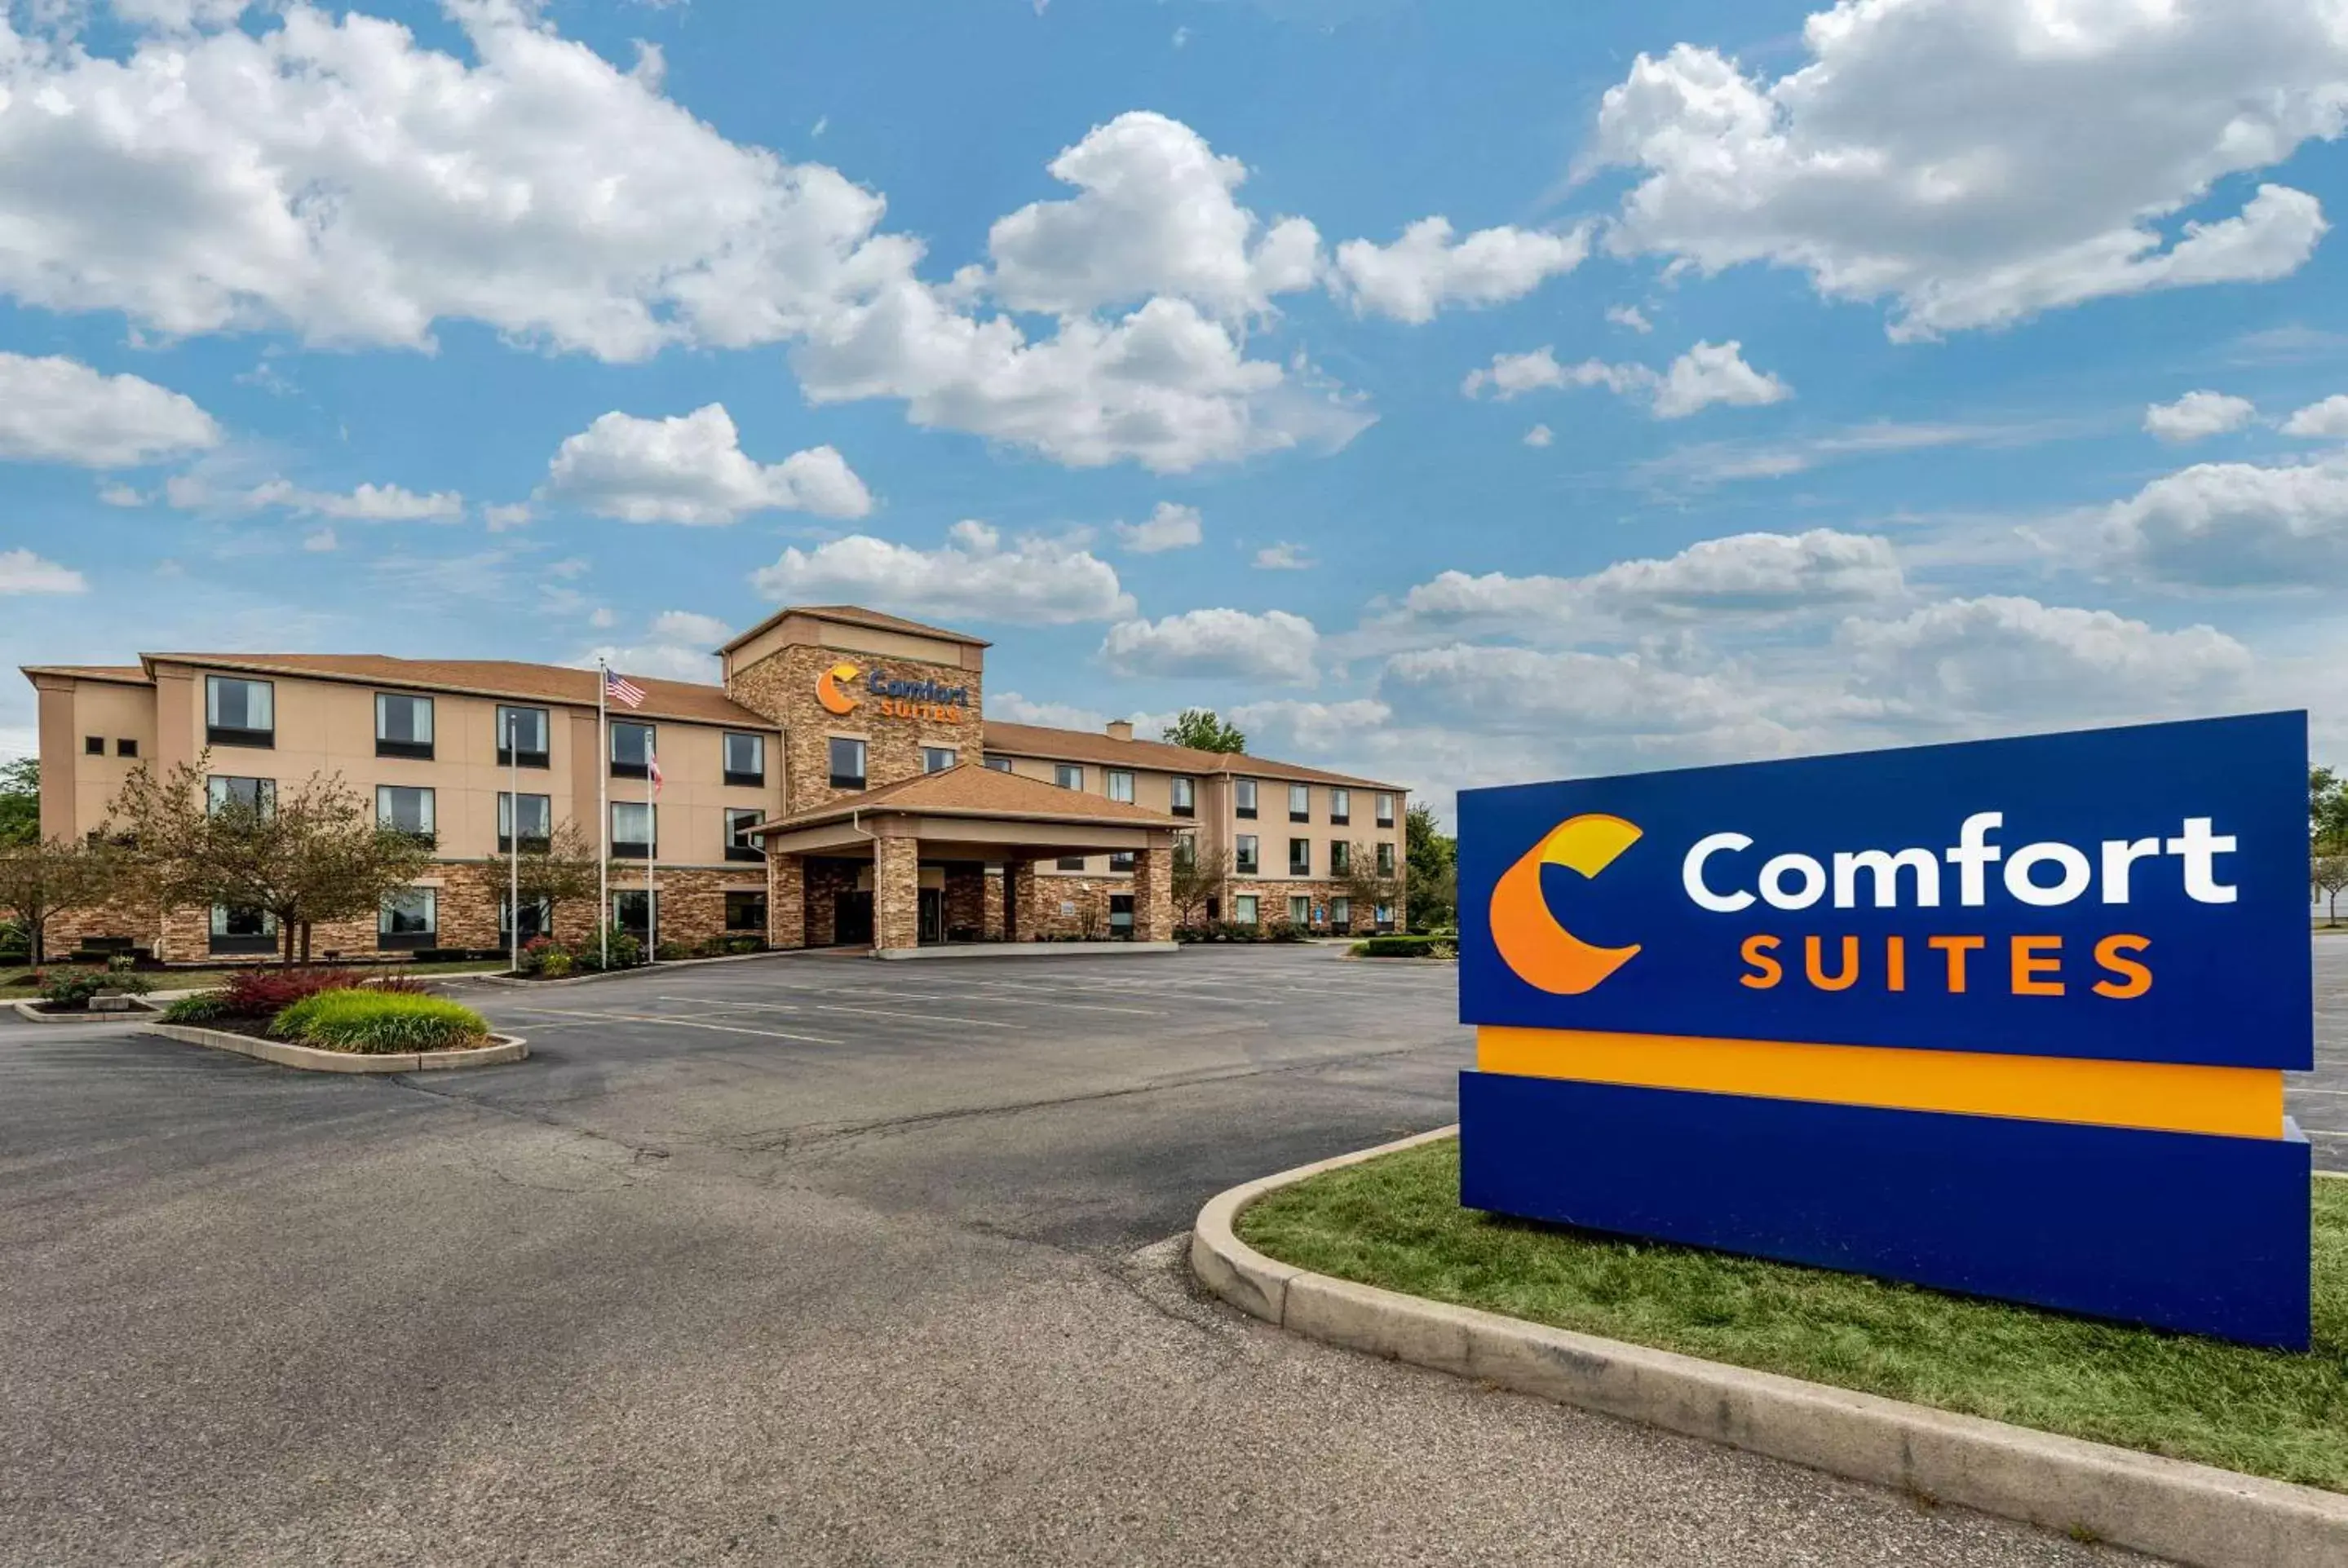 Property building in Comfort Suites Dayton-Wright Patterson